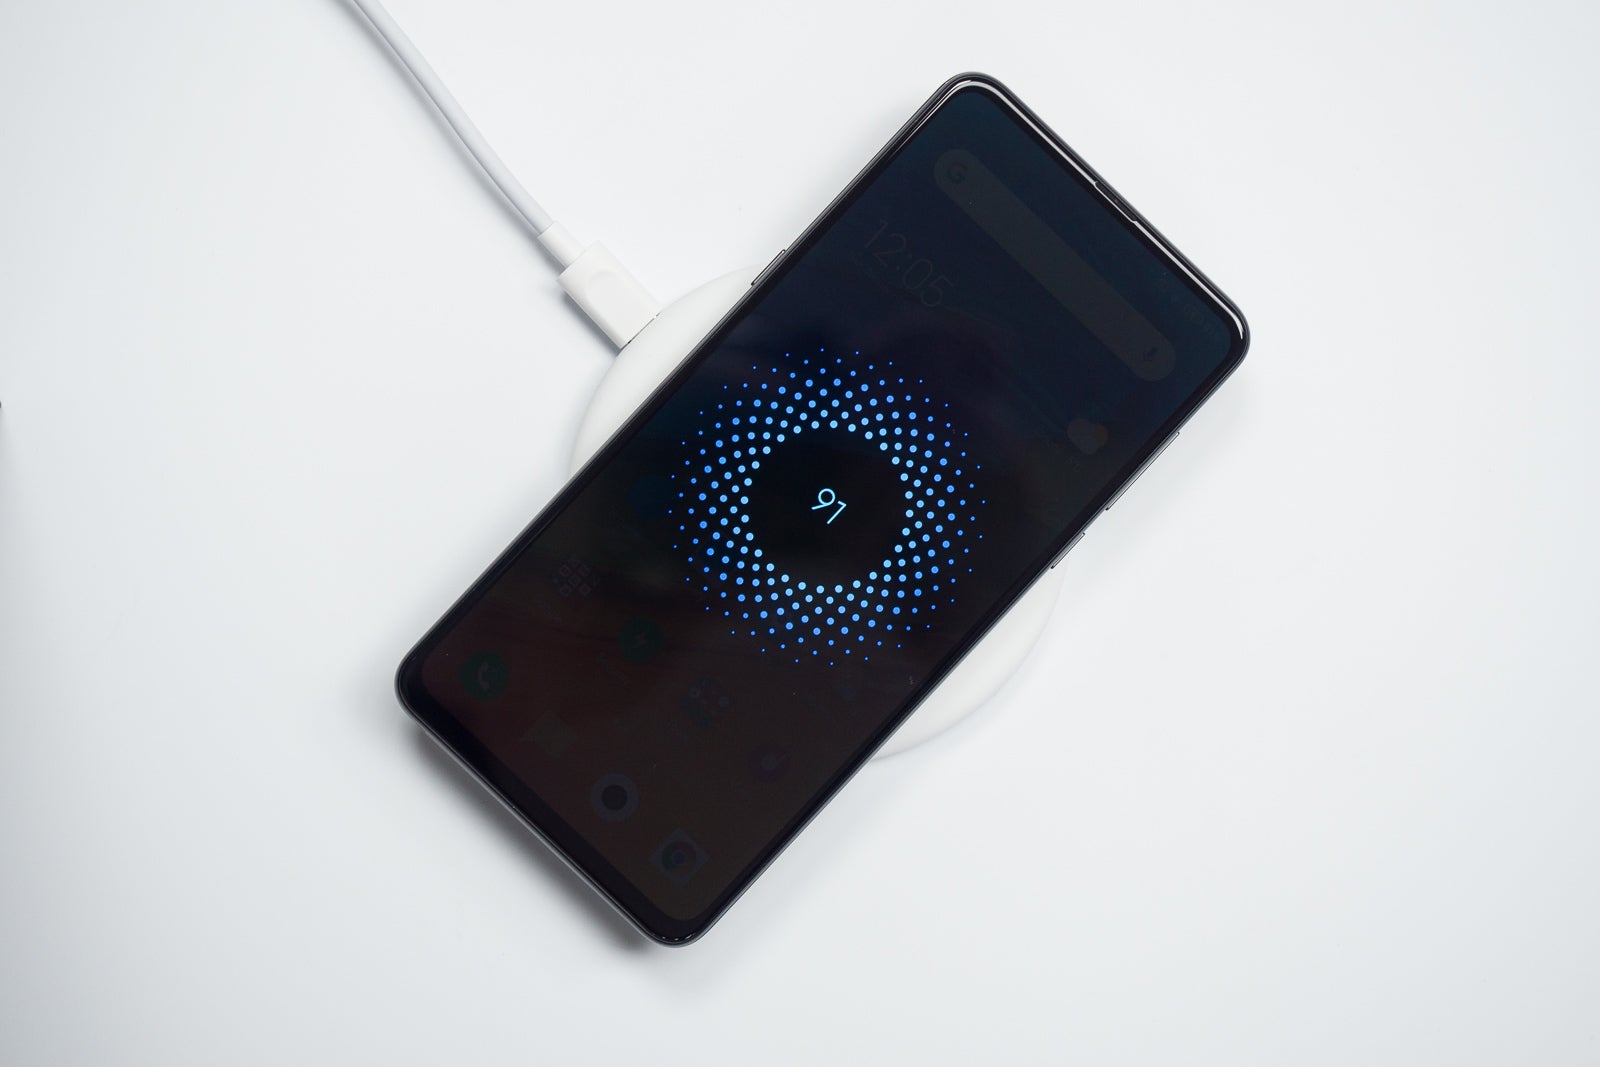 Some flagships even come with a wireless charger in the box, so you can enjoy the feature immediately - Are reviewers misjudging cheaper smartphones due to their constant exposure to flagships?